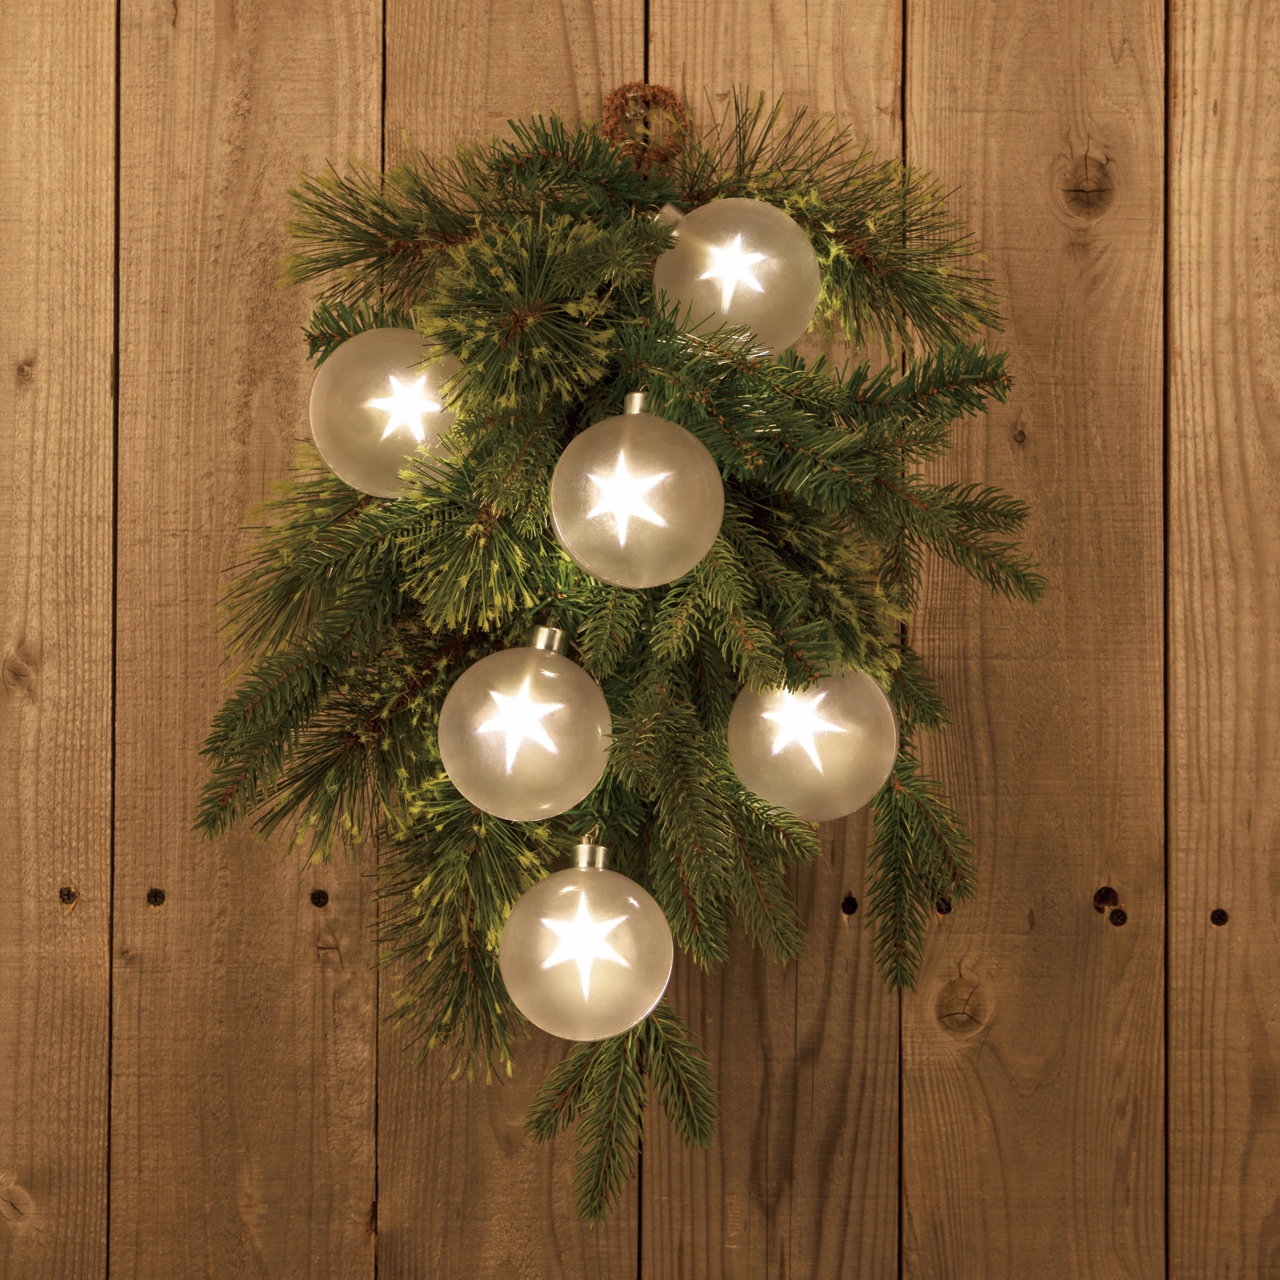 This magical wreath carries the stars to bring some sparkle to your room